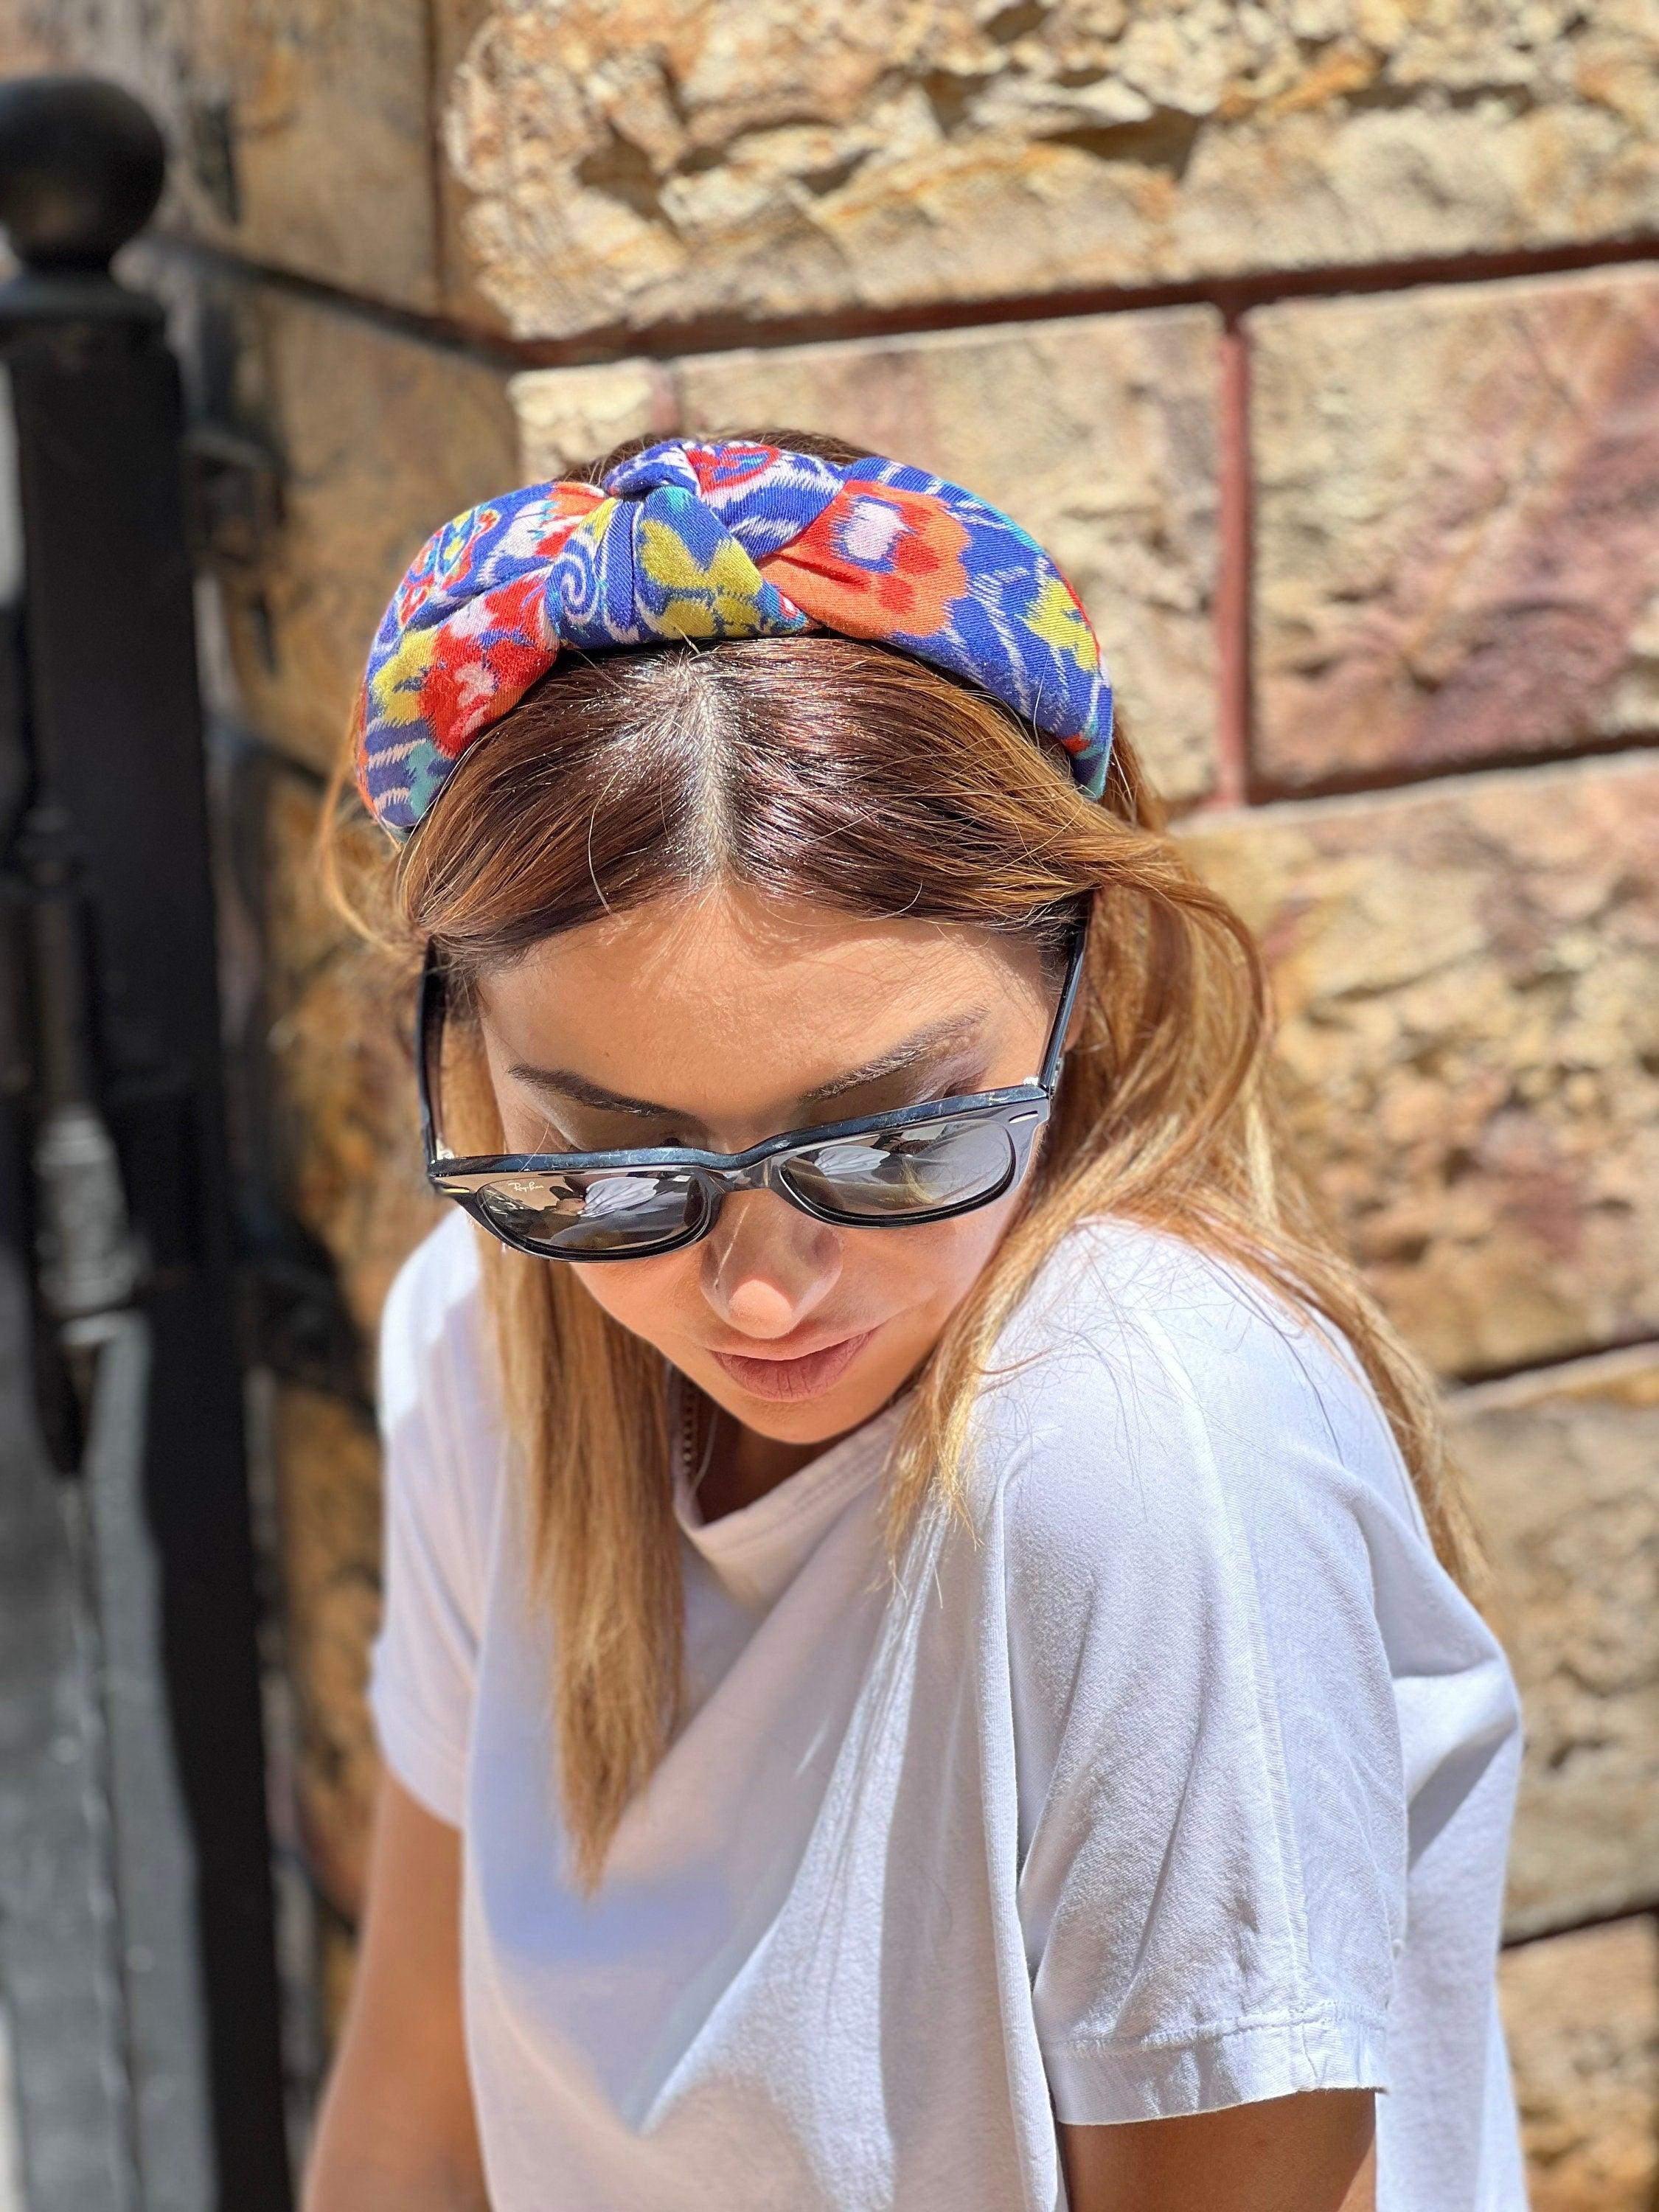 Beautiful Ethnic Pattern Knotted Headband in Blue, Pink, and Yellow - Wide and Stylish Women's Hairband with Cotton Padding available at Moyoni Design